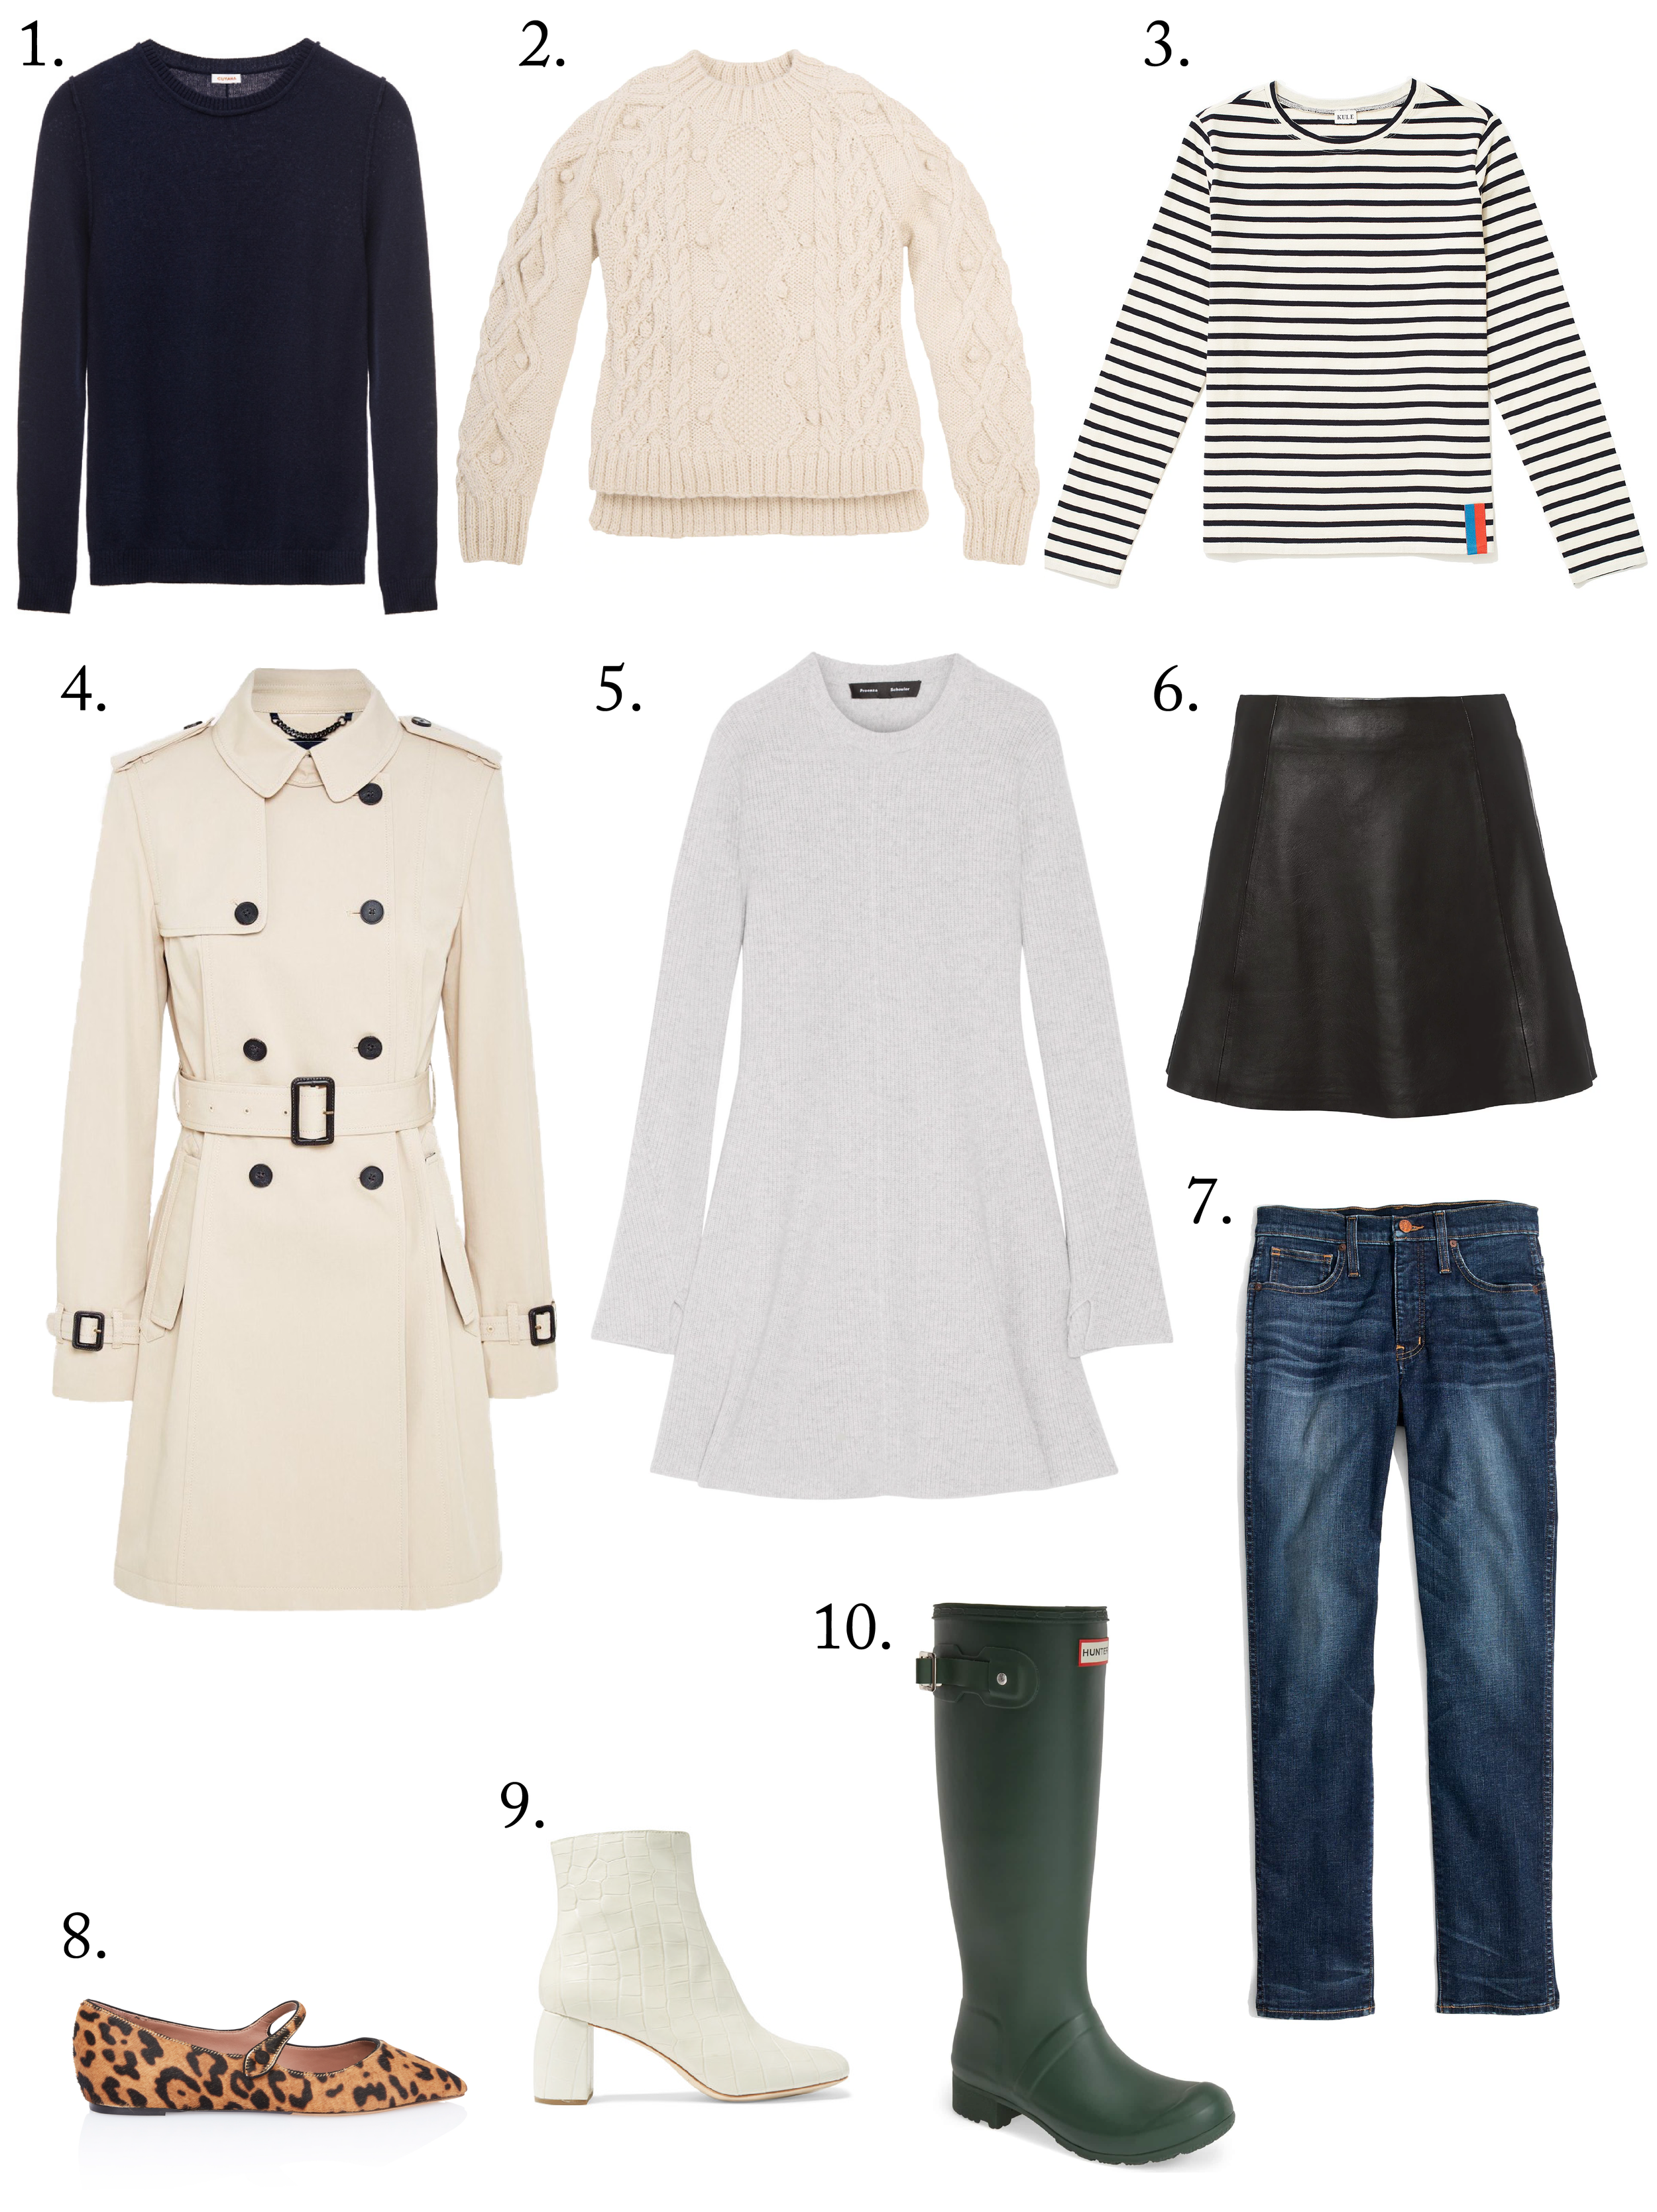 My Top 10 Style Staples for Fall